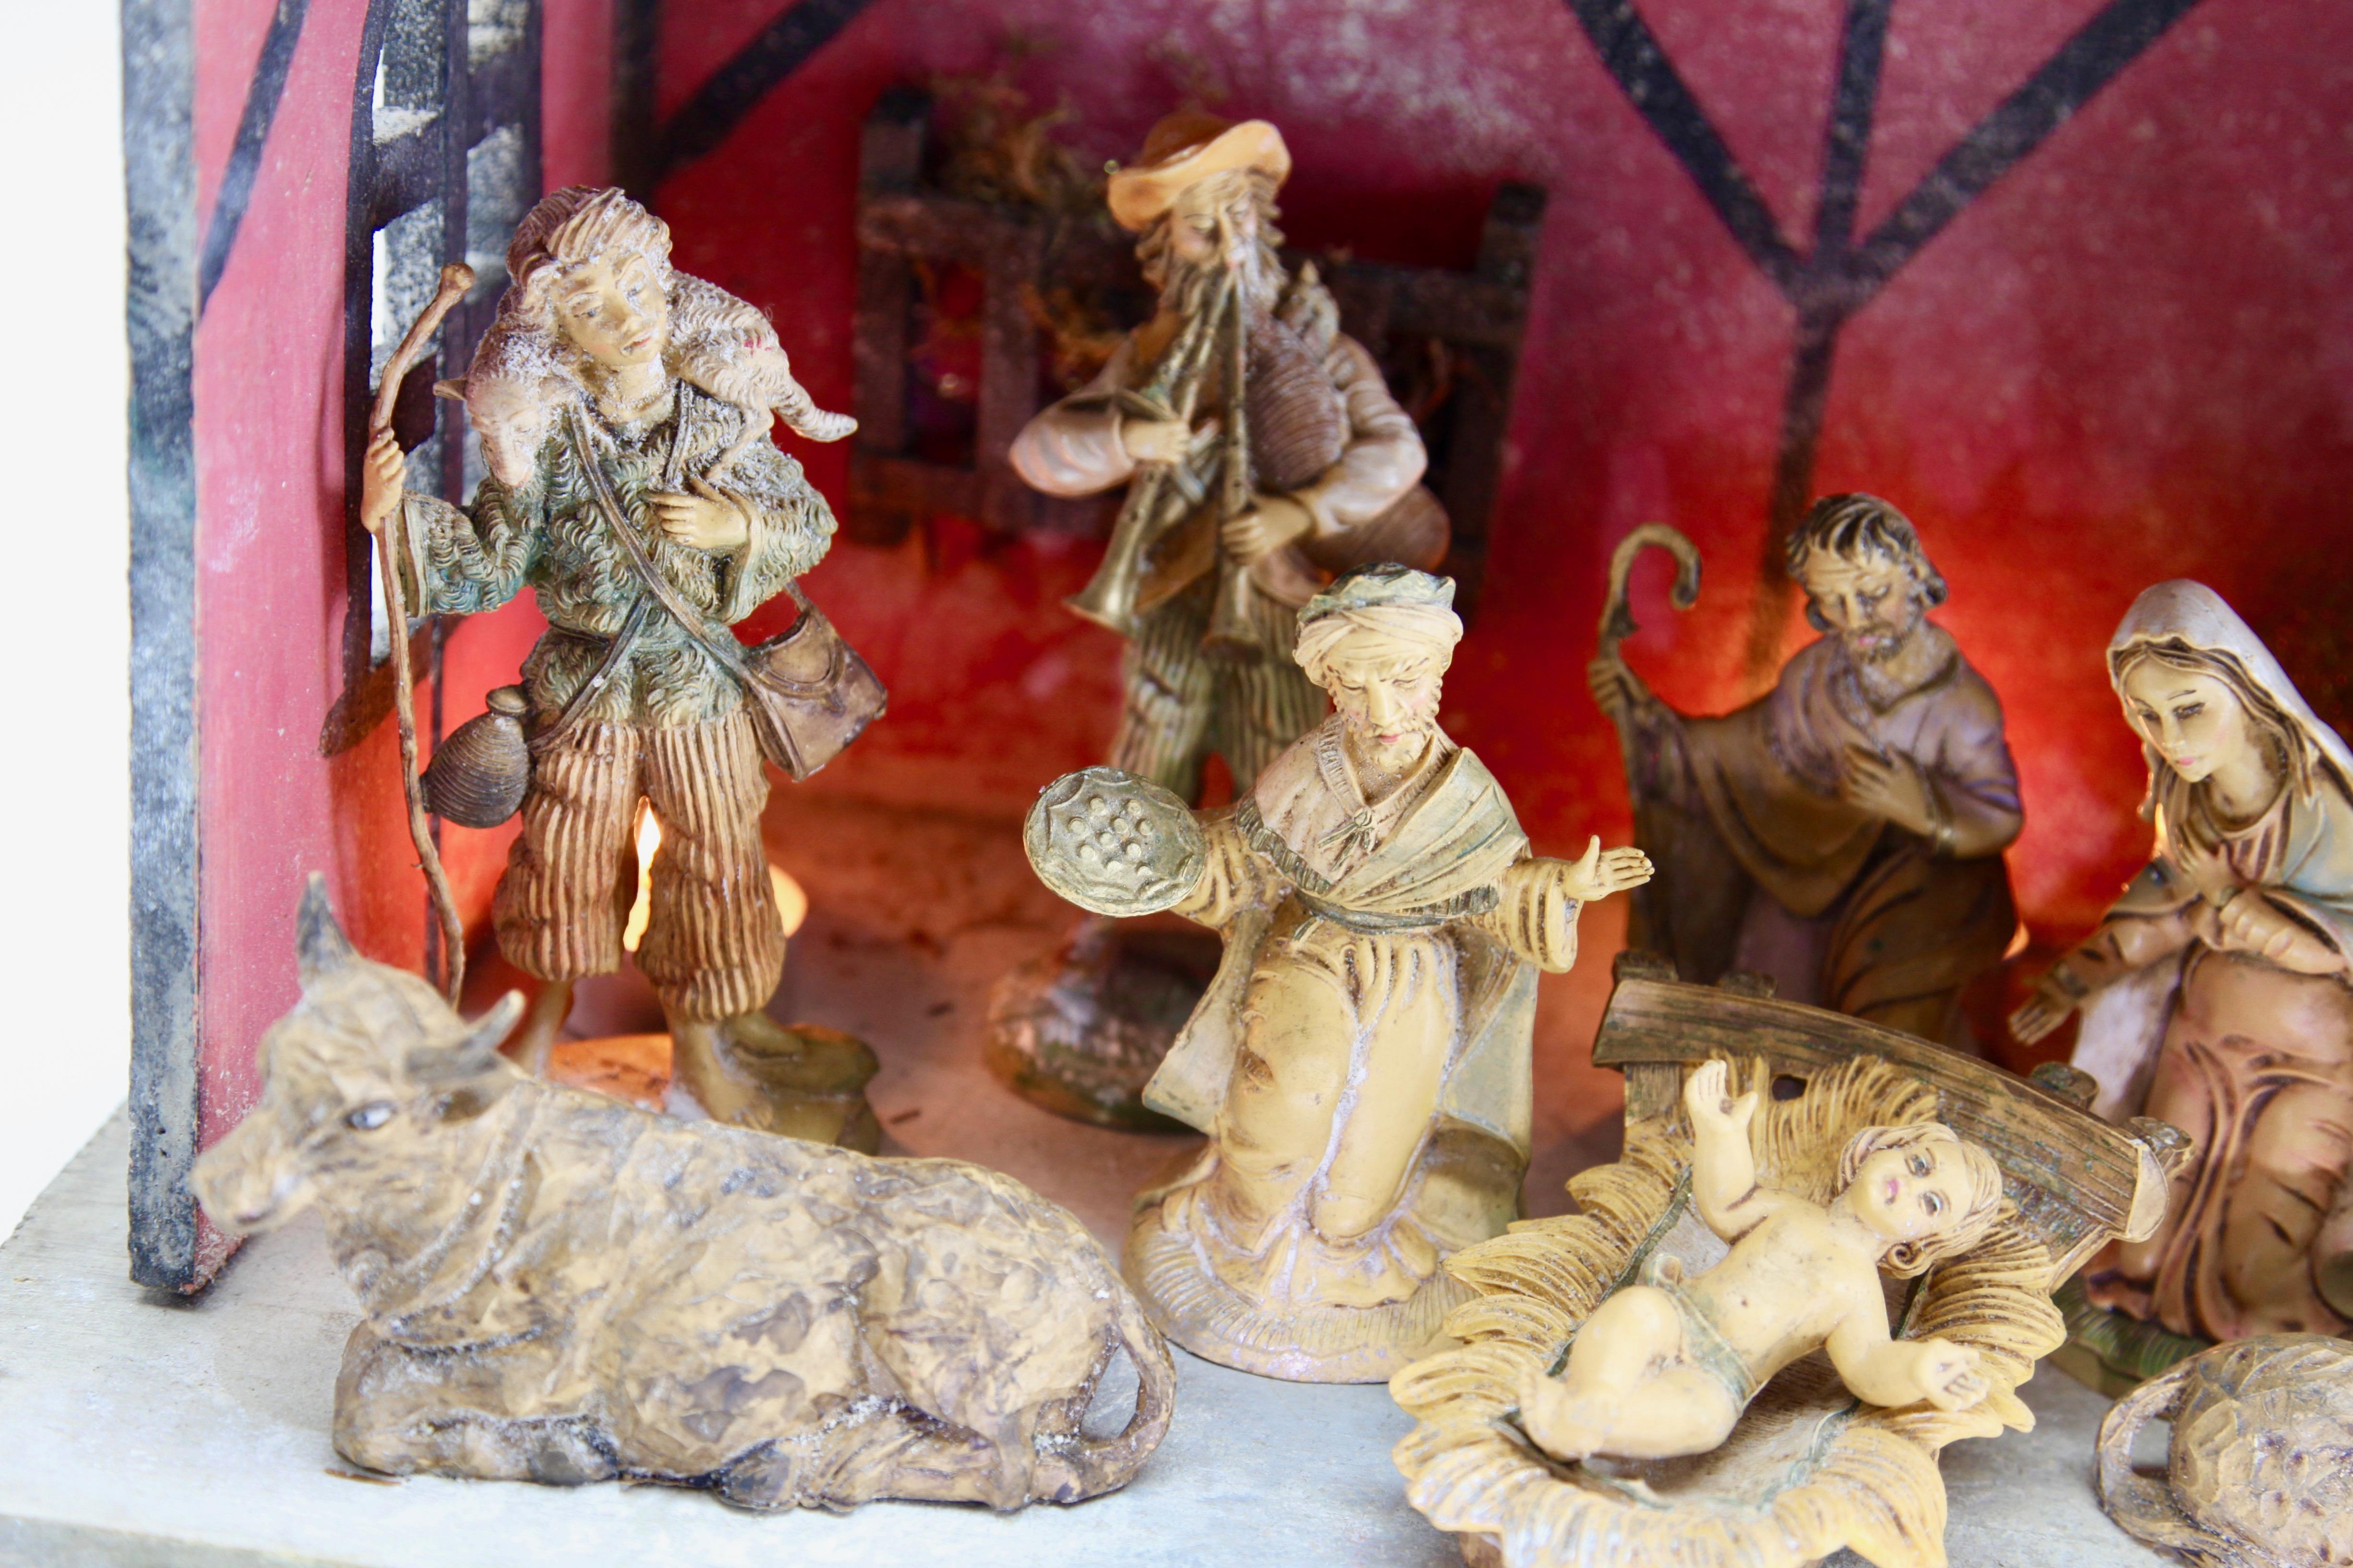 Folk Art Italian Christmas Nativity Scene with 10 Traditional Figures and Wooden Stable